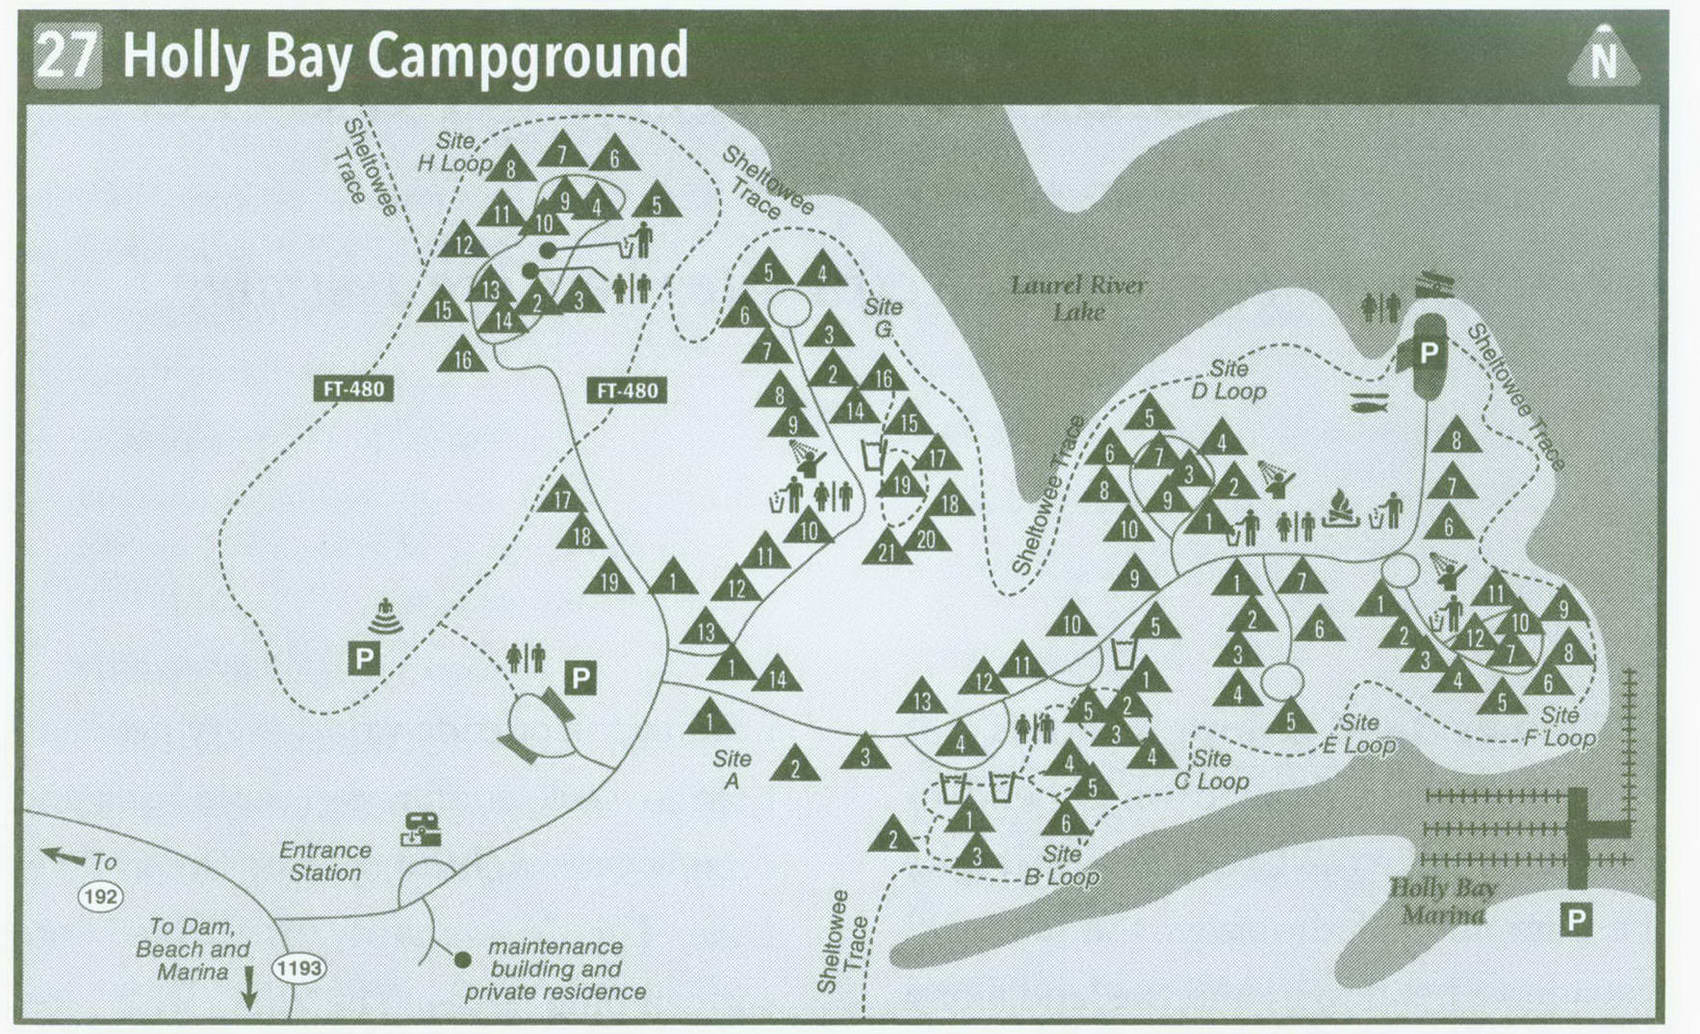 Plan of Holly Bay Campground